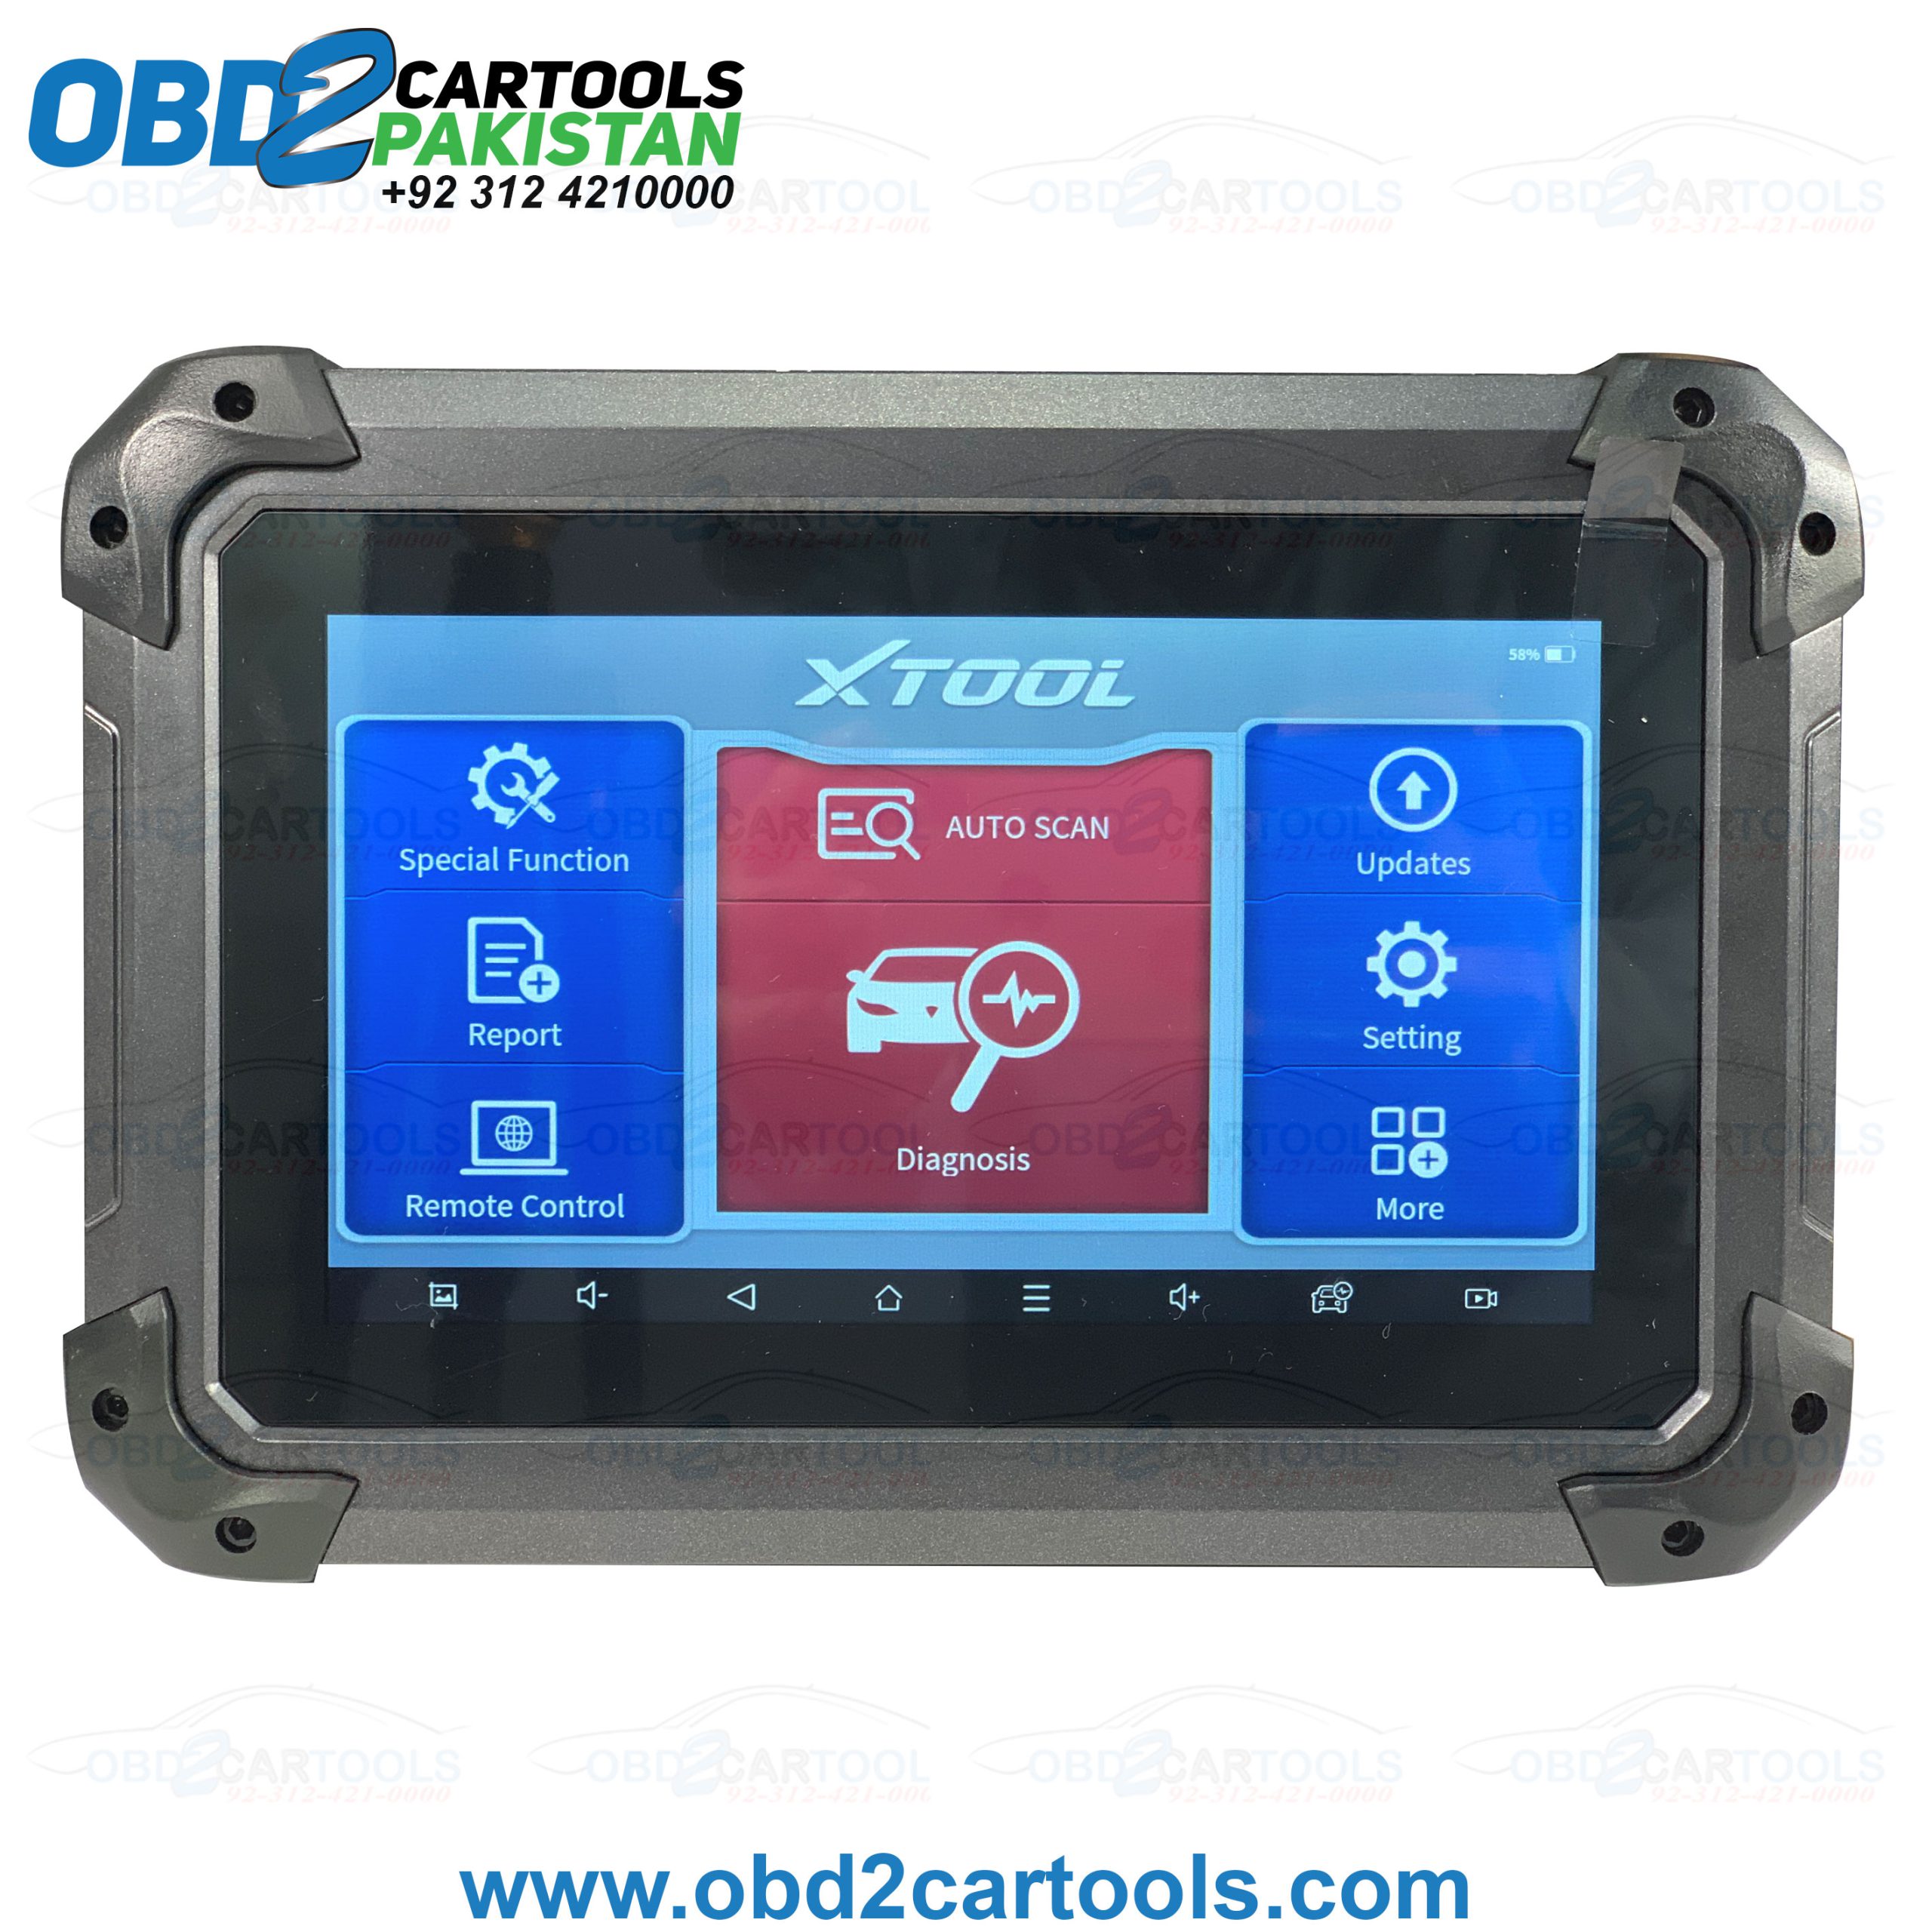 Product image for XTOOL PS70 Pro OBD2 Diagnostic Tool Professional Full System Car scanner 3 Years Free Update